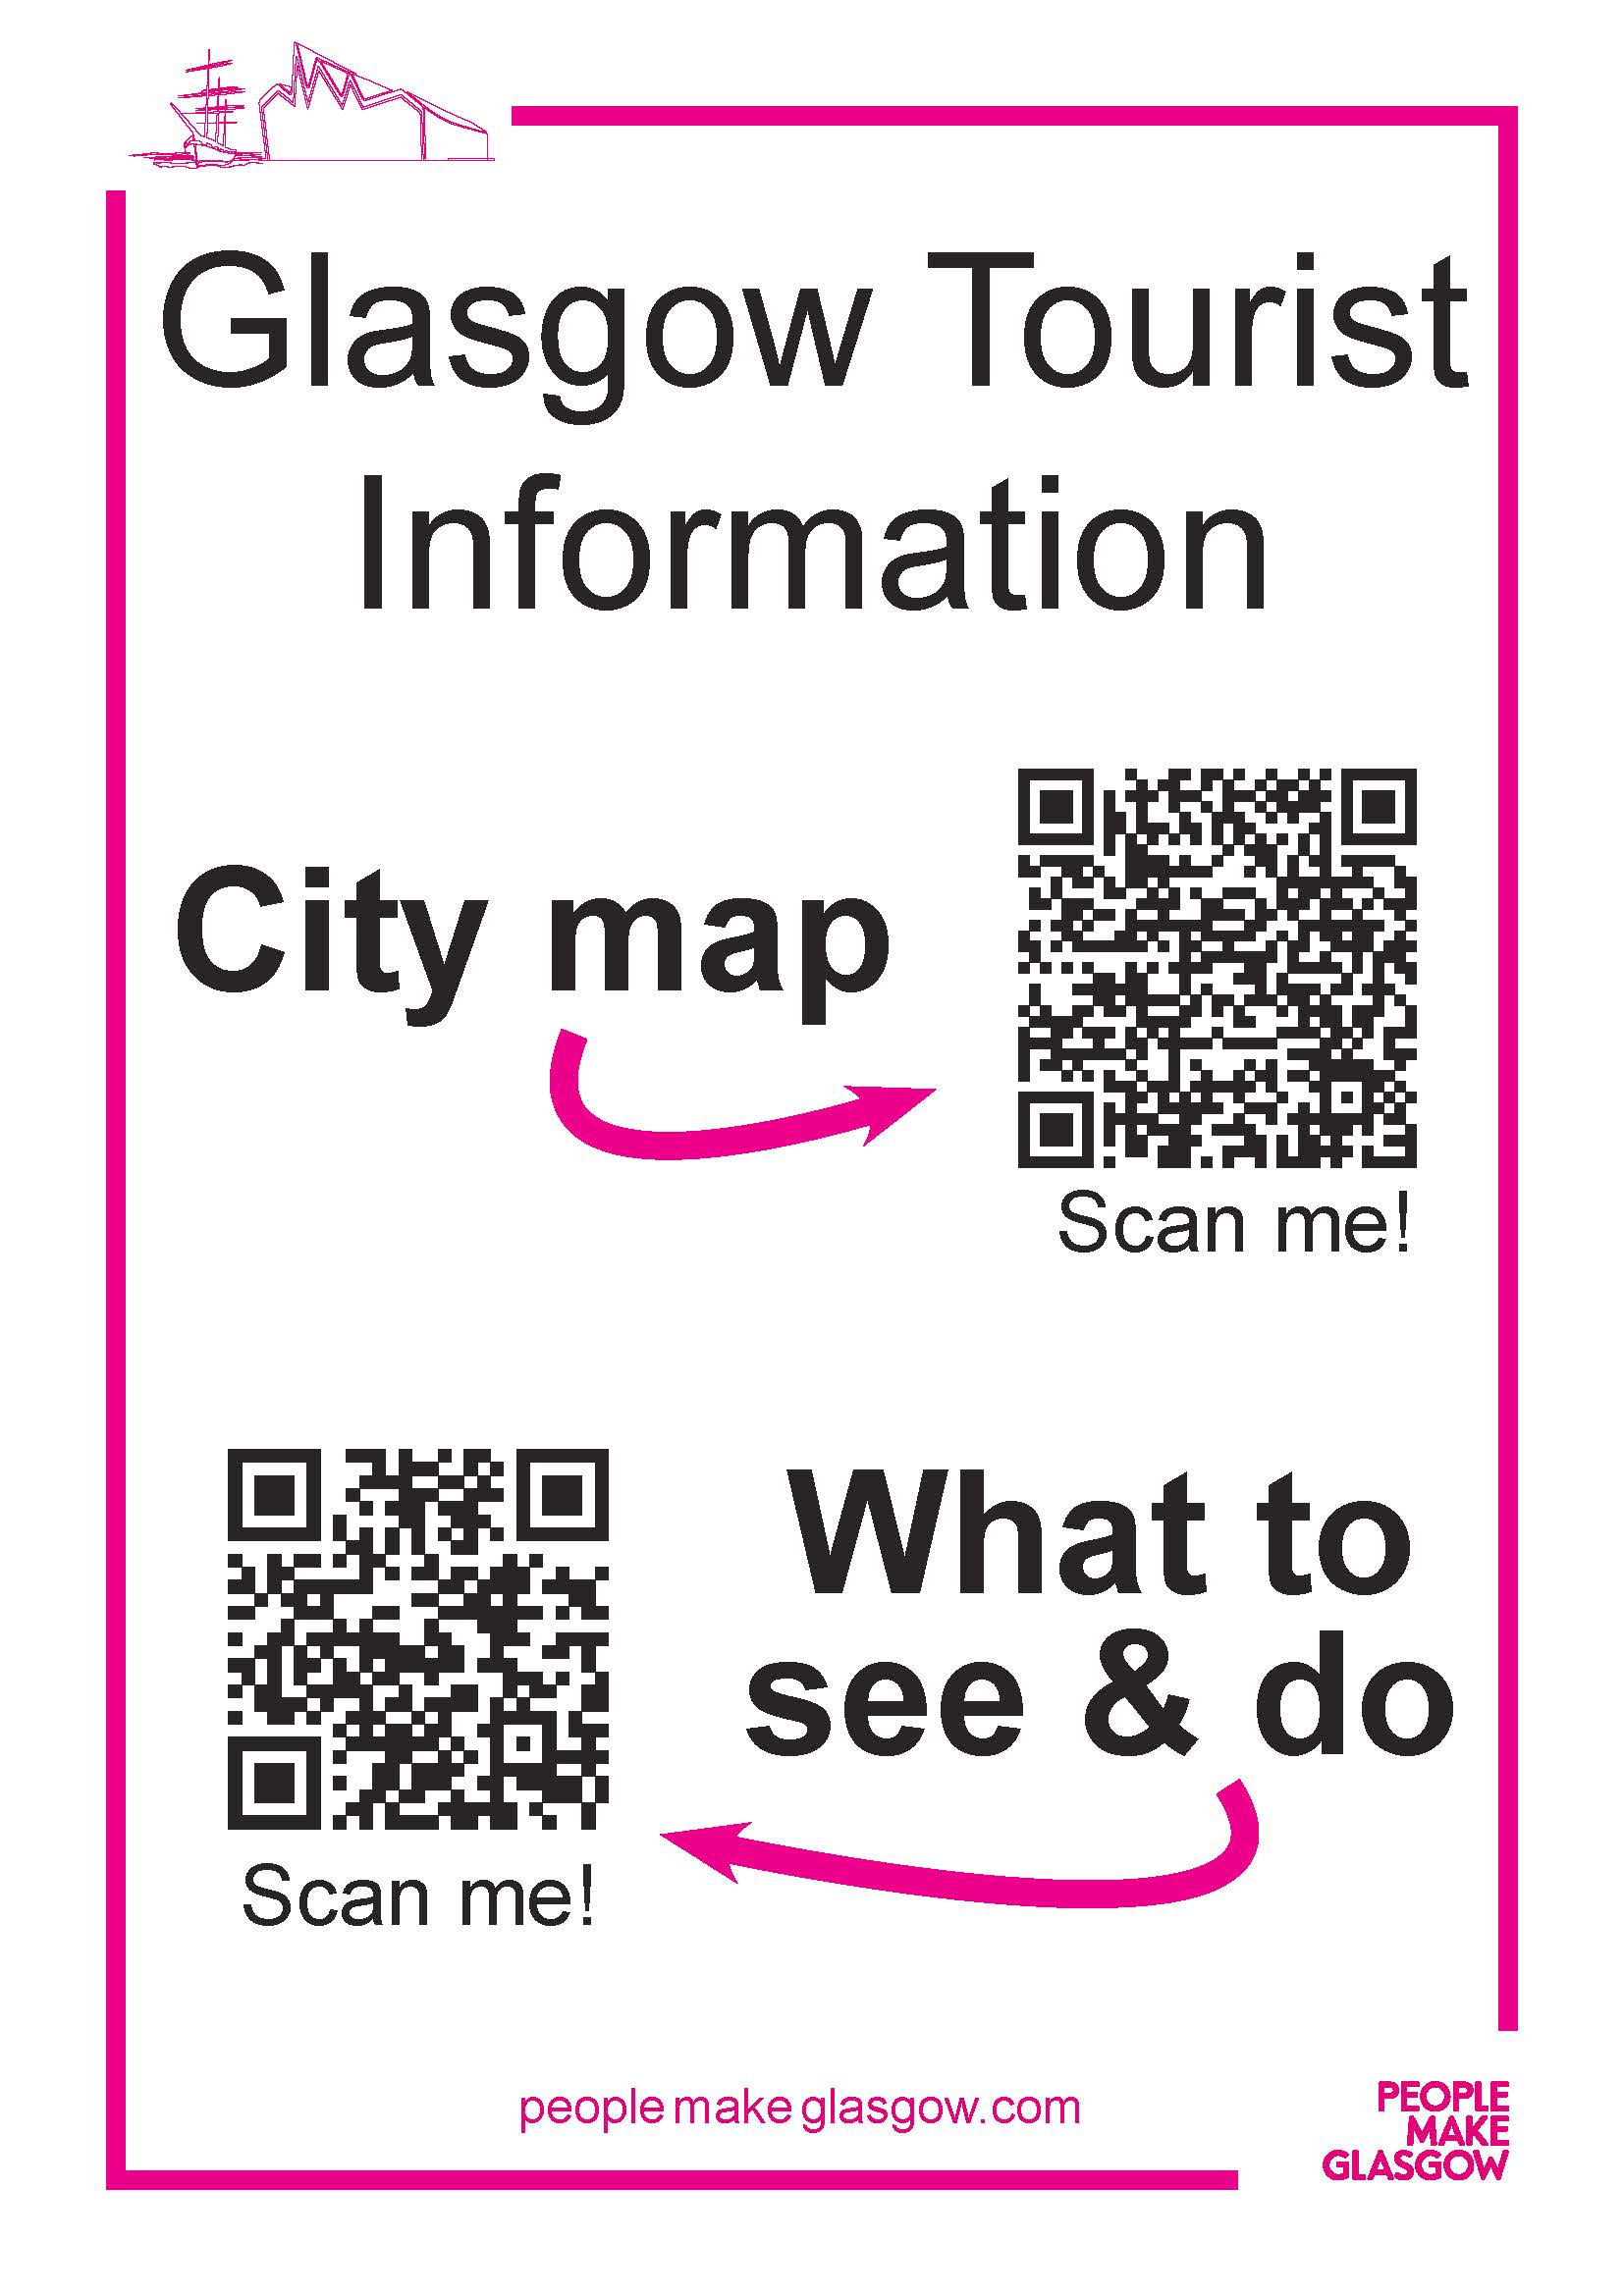 QR codes with links to Glasgow city map and what to see and do